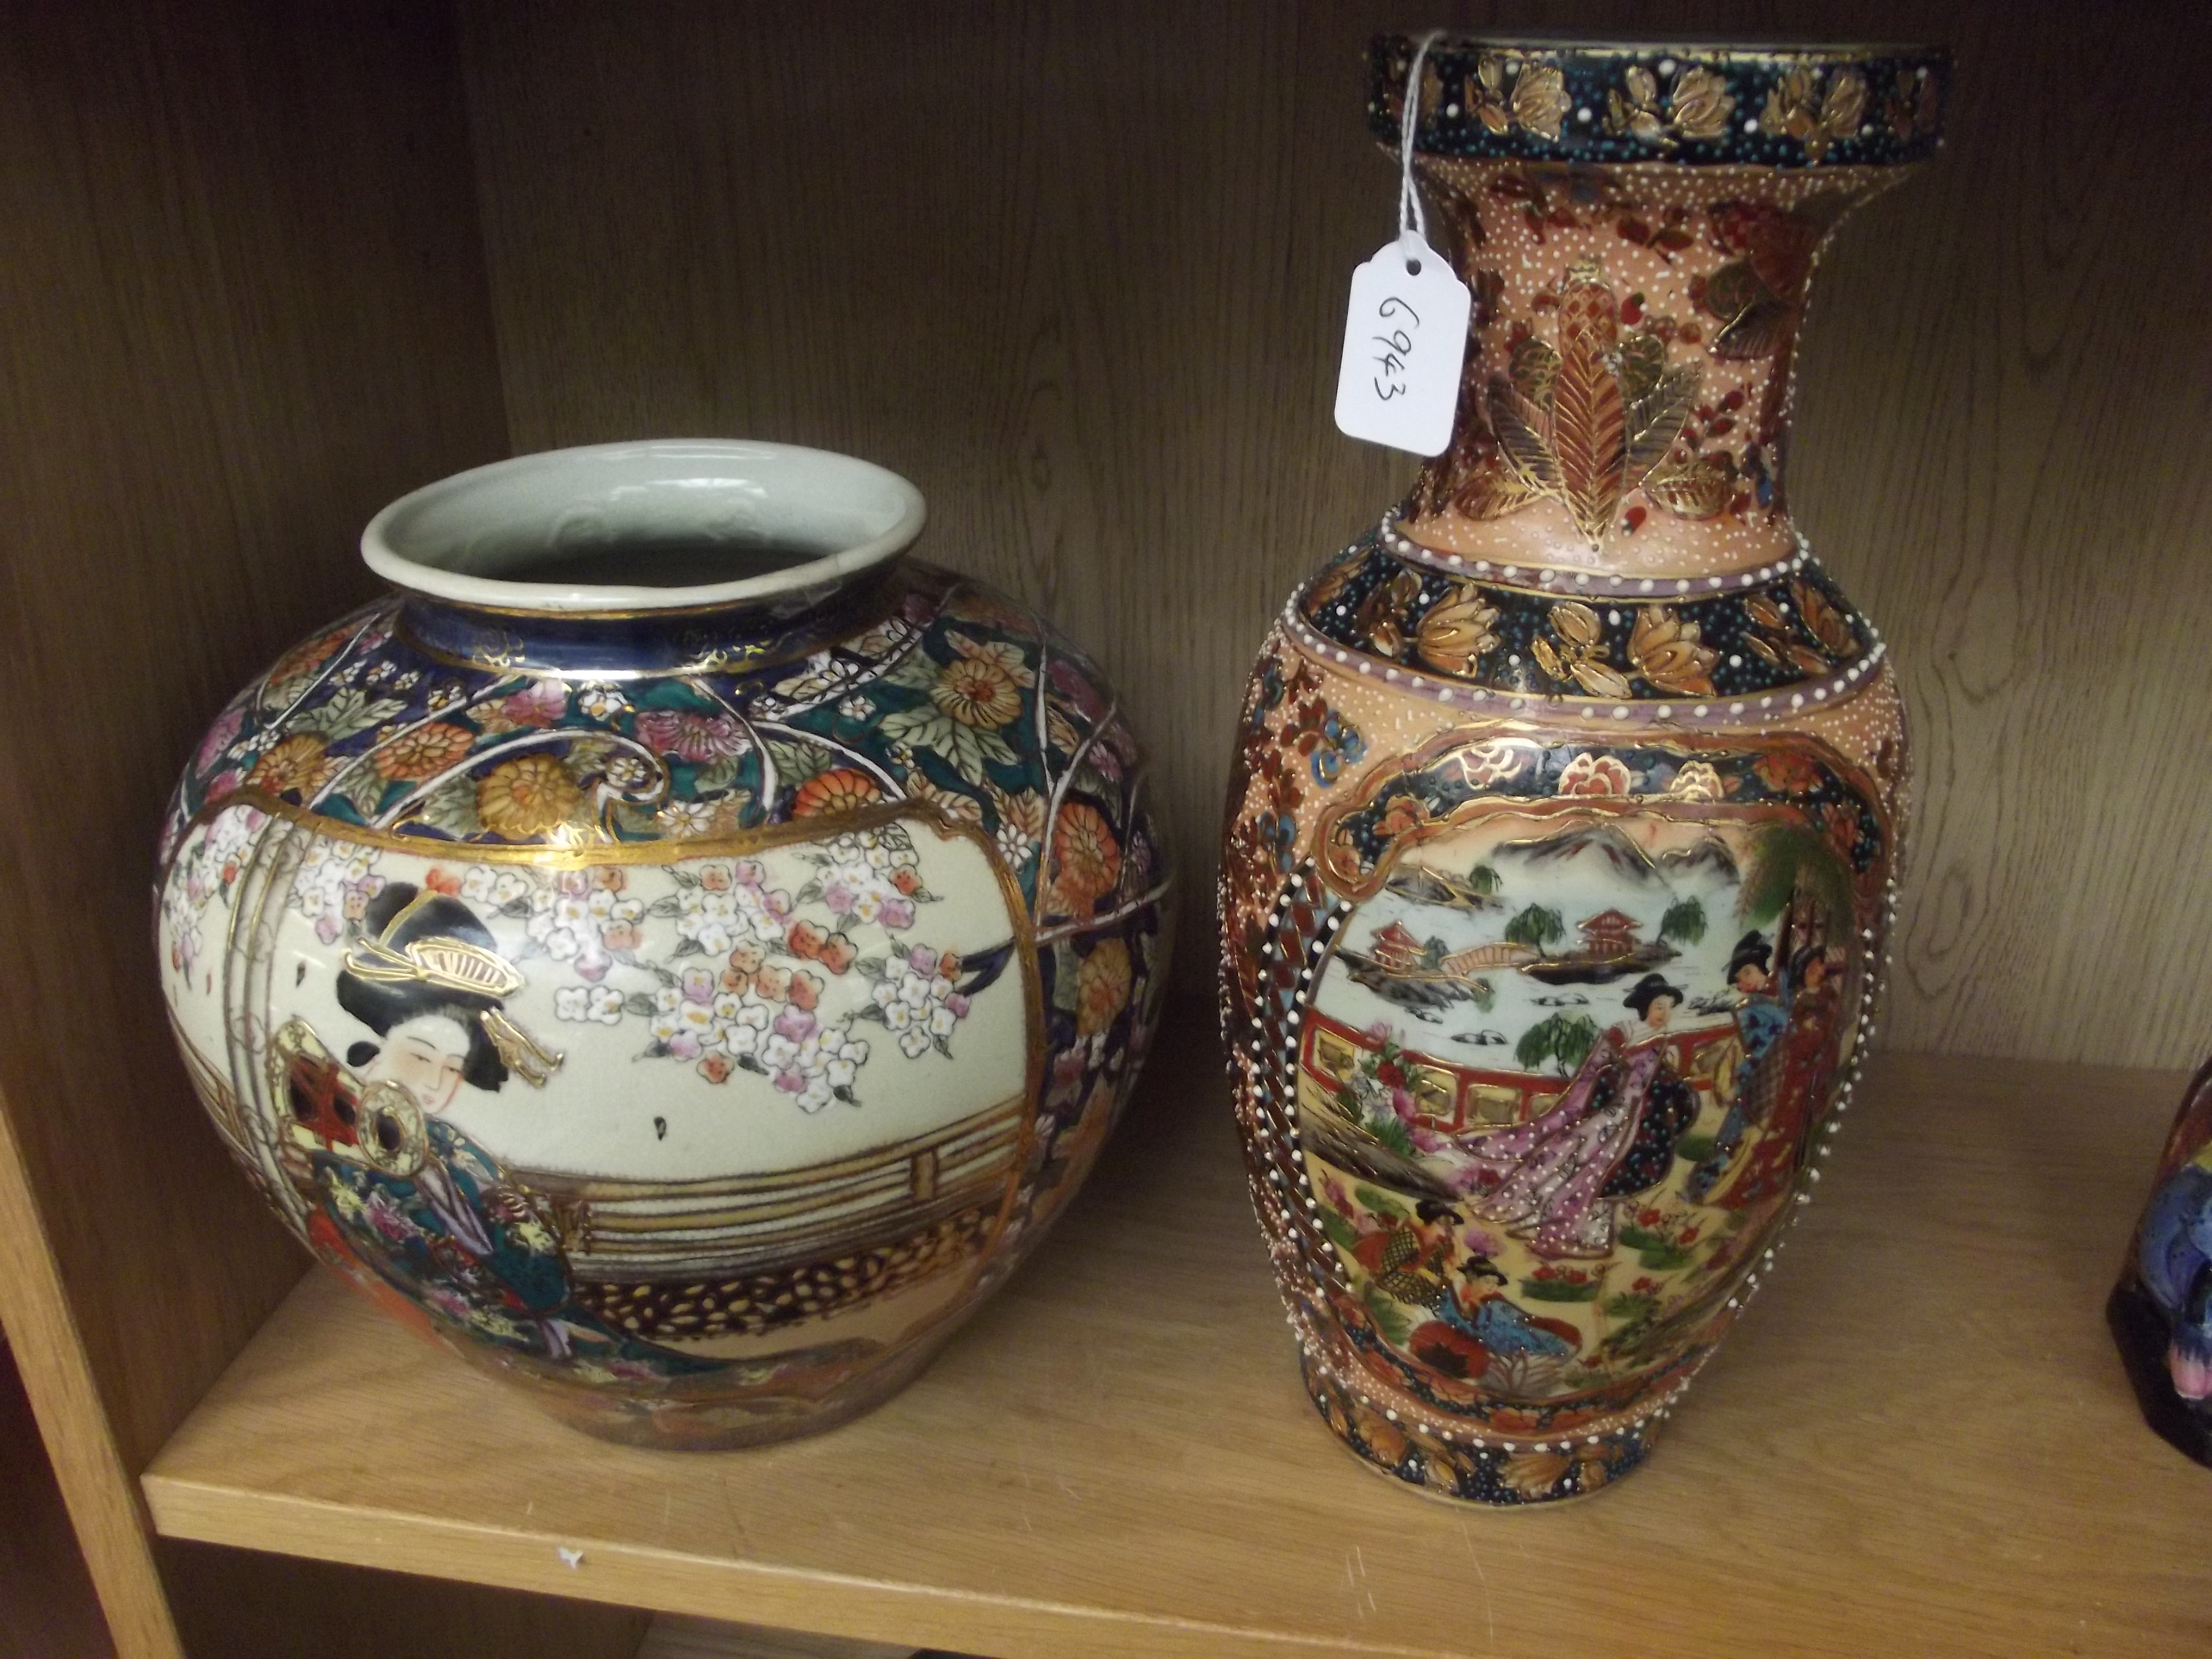 Two oriental style ceramic vase and jardiniere